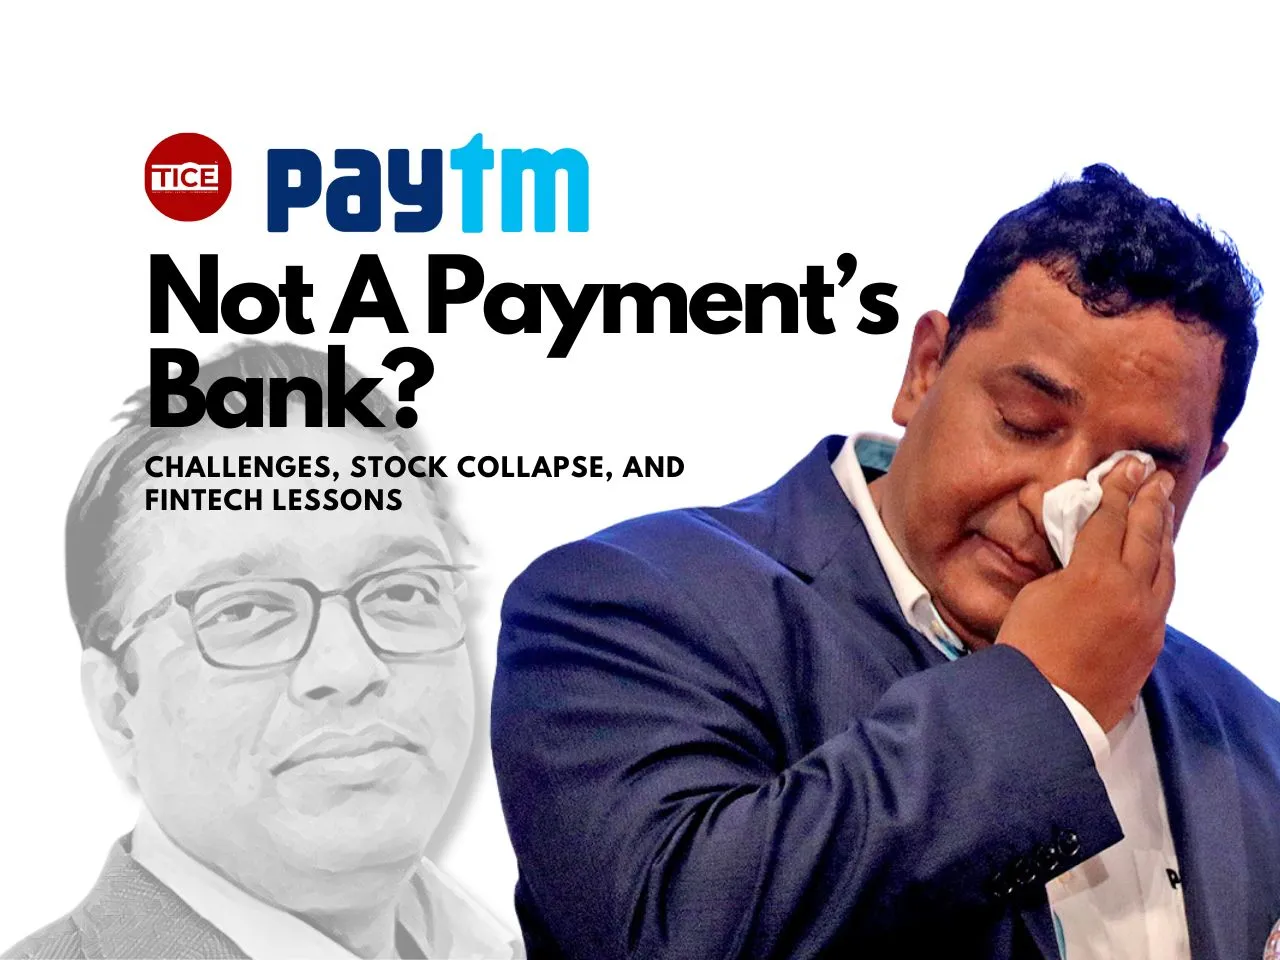 The Great Fintech Fiasco: What Lies Ahead for Paytm, Partners & You?